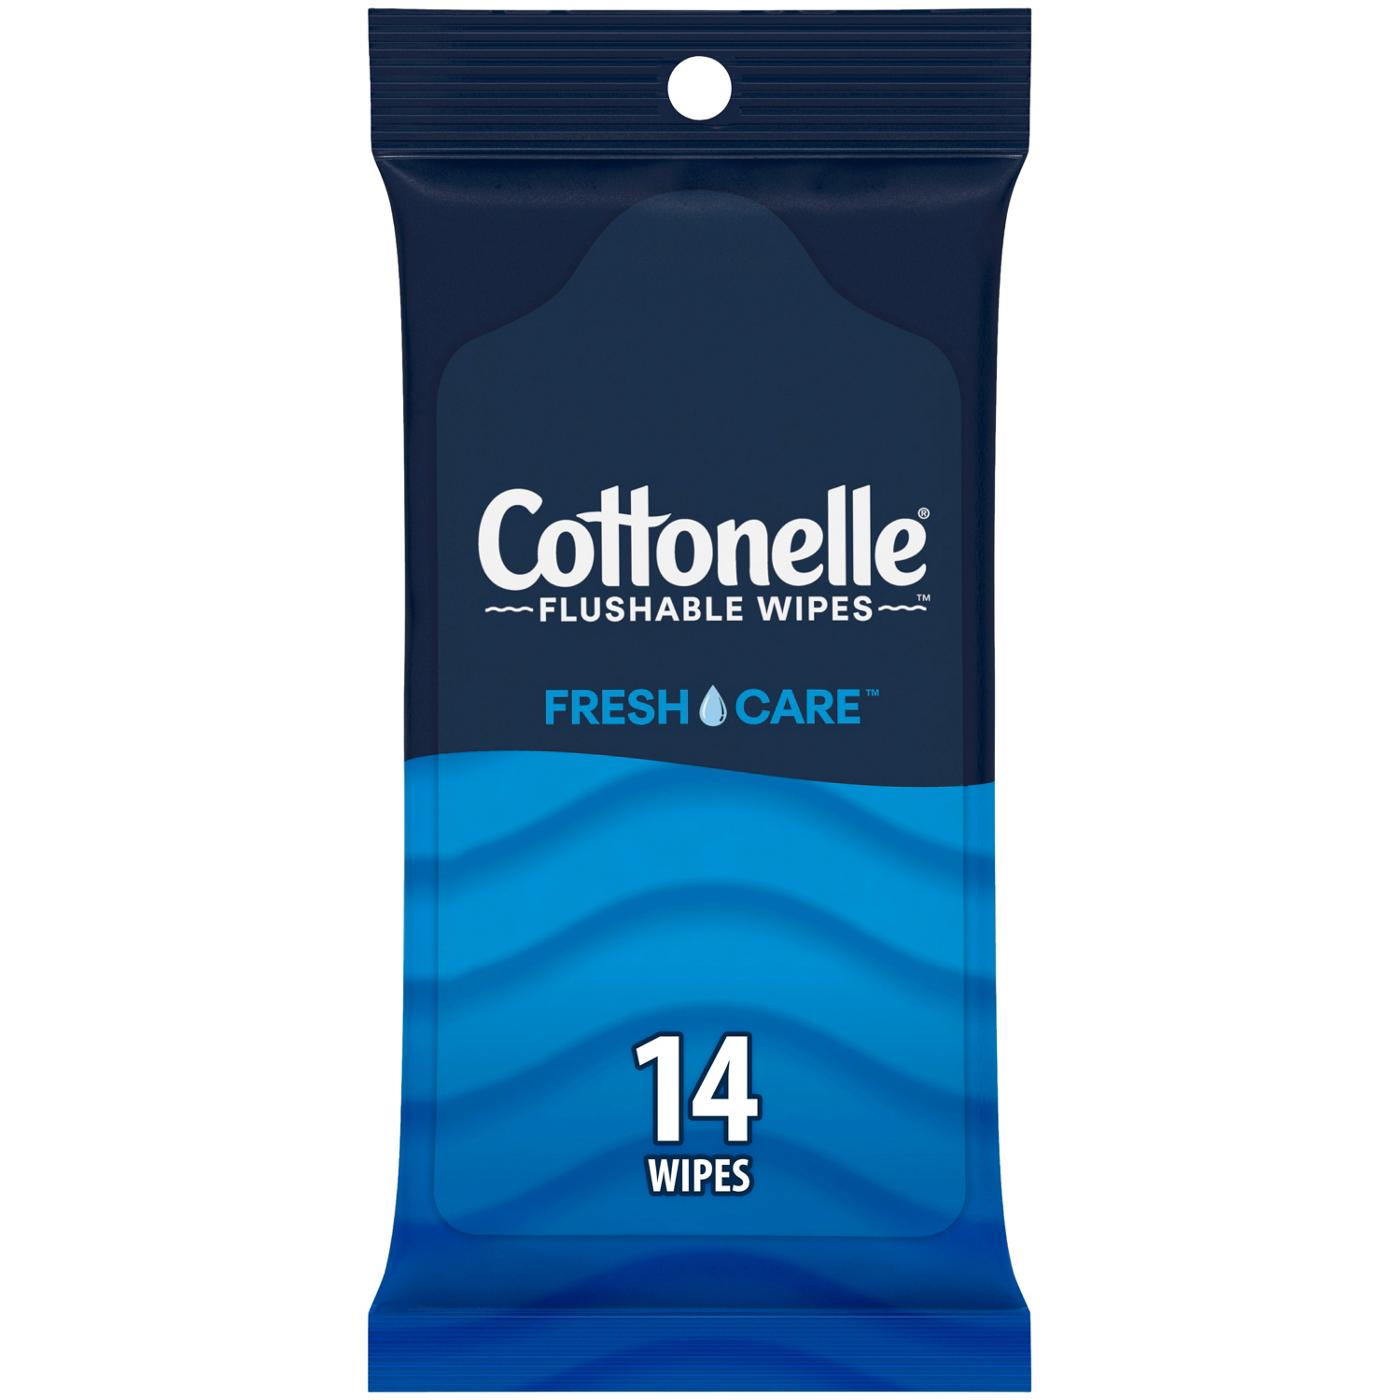 Cottonelle FreshCare Flushable Wipes On-The-Go Pack; image 1 of 6